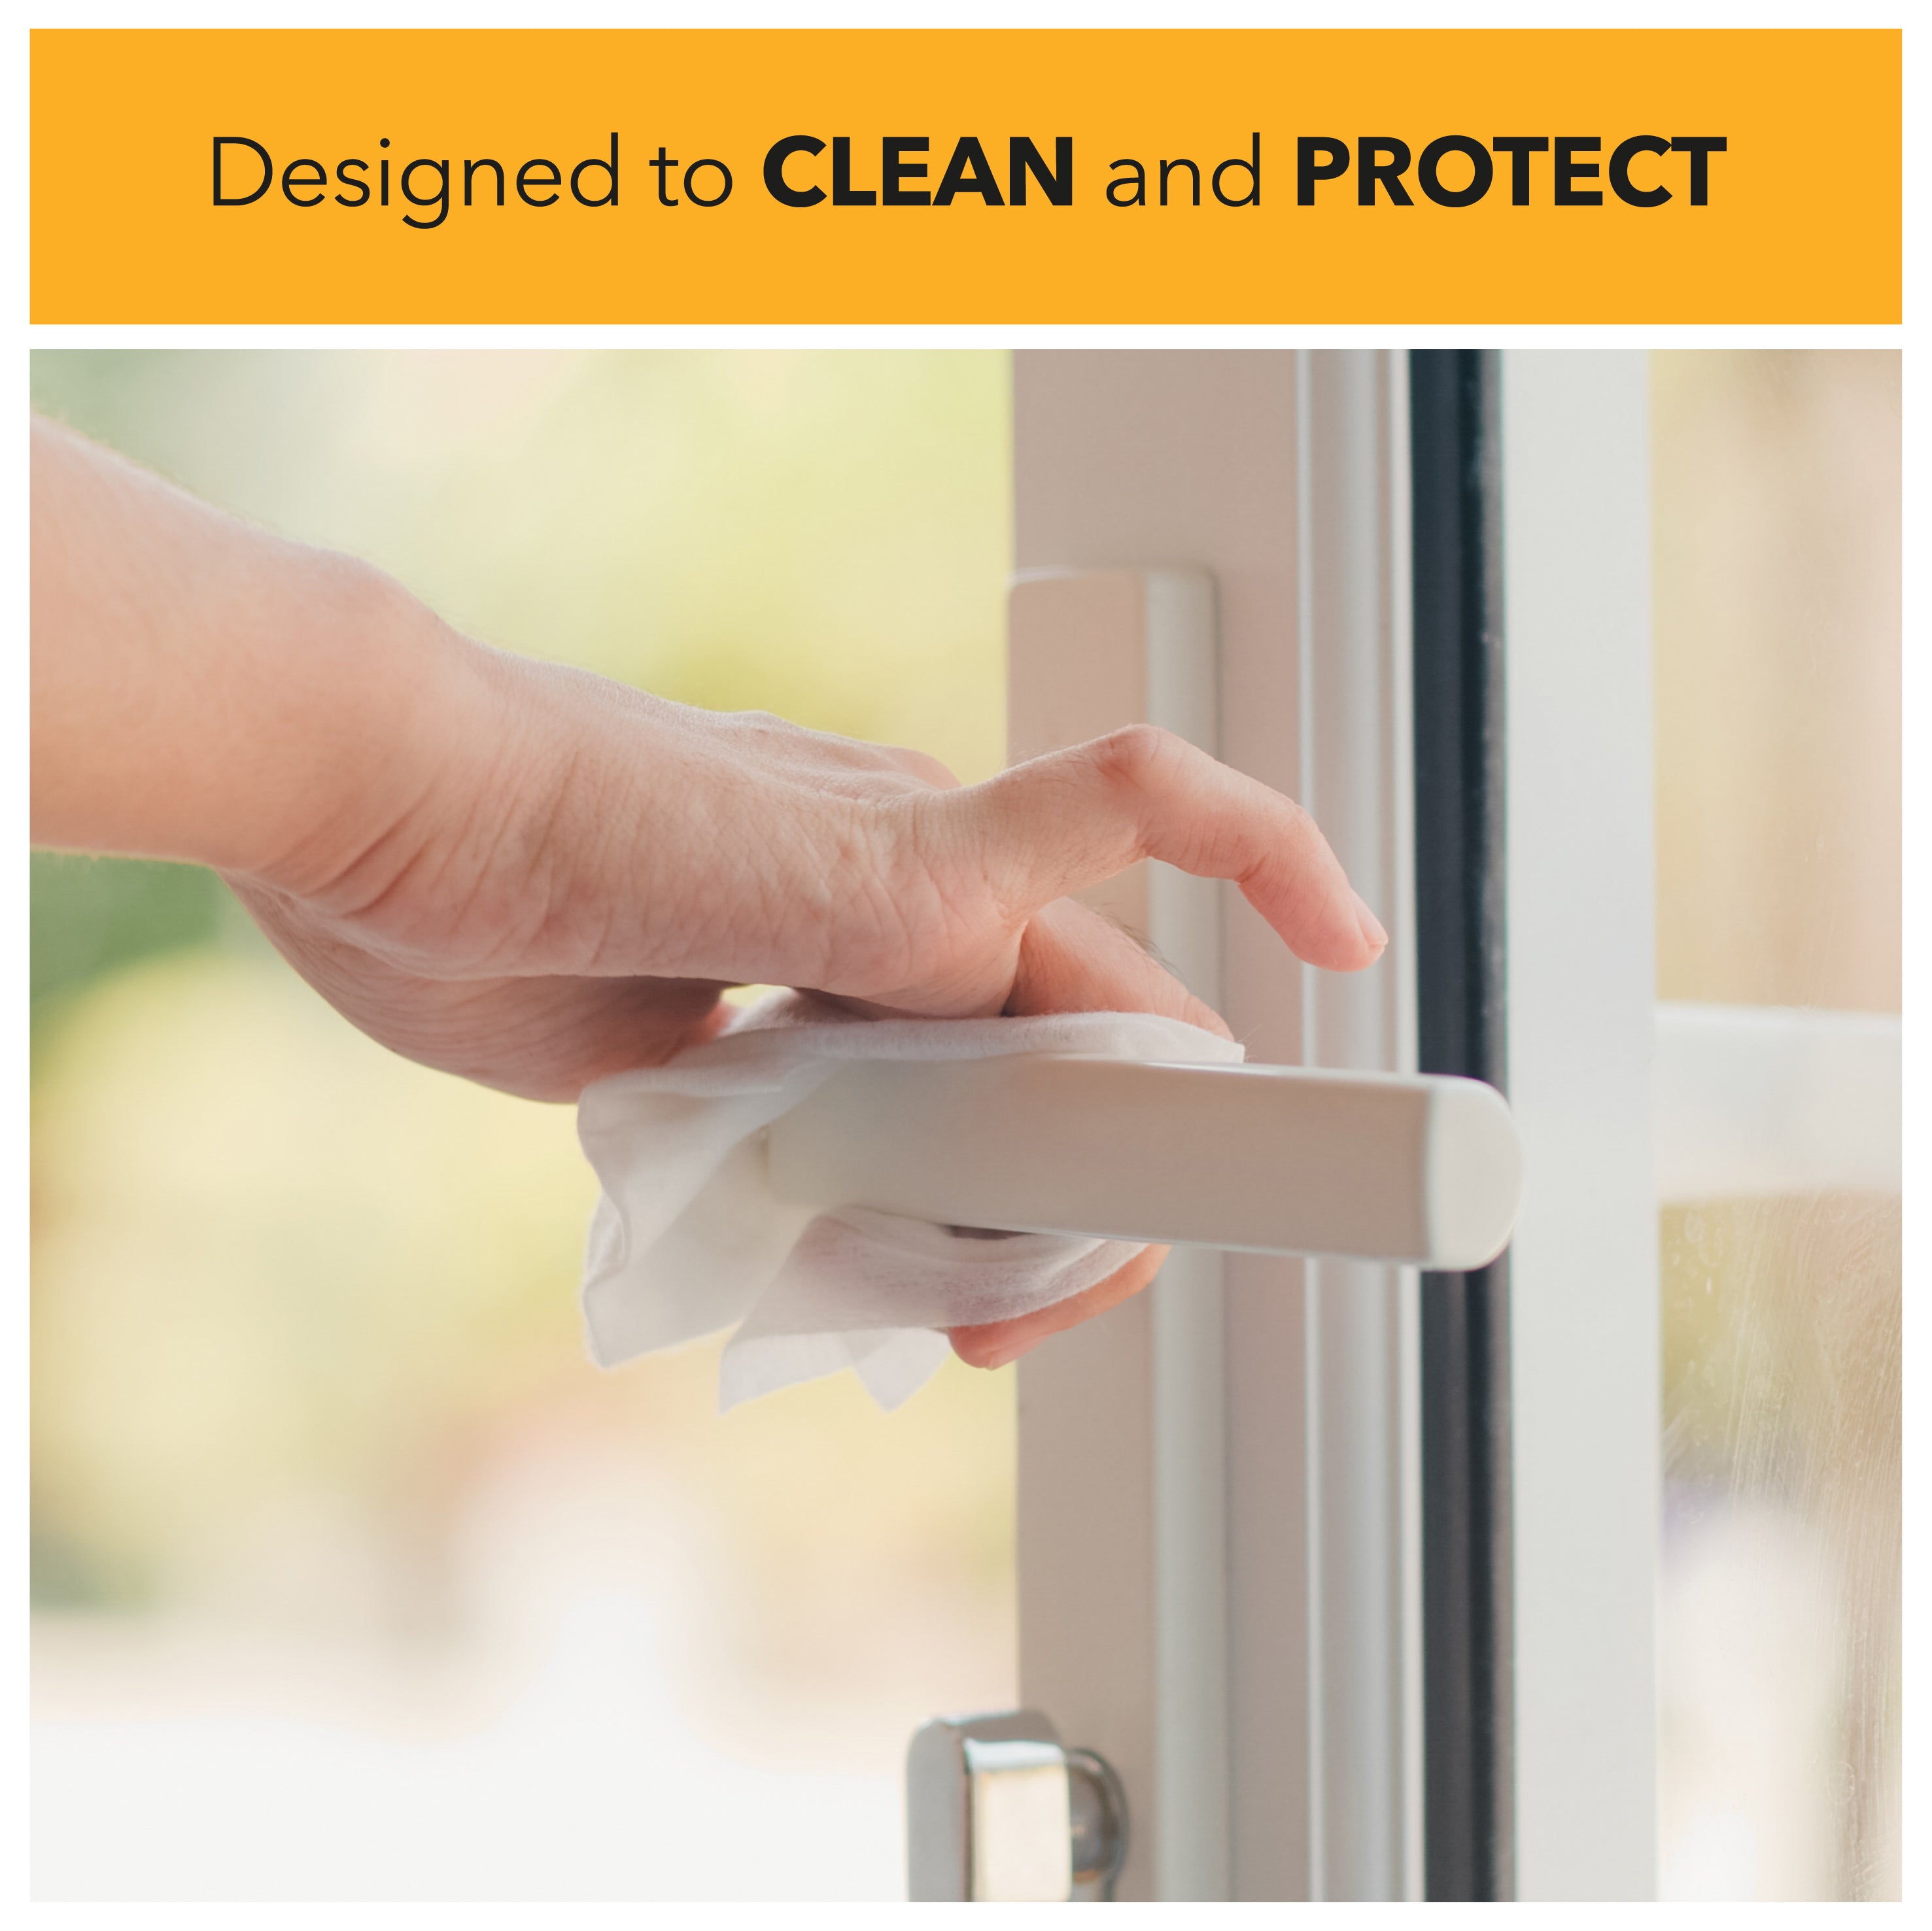 designed to clean and protect